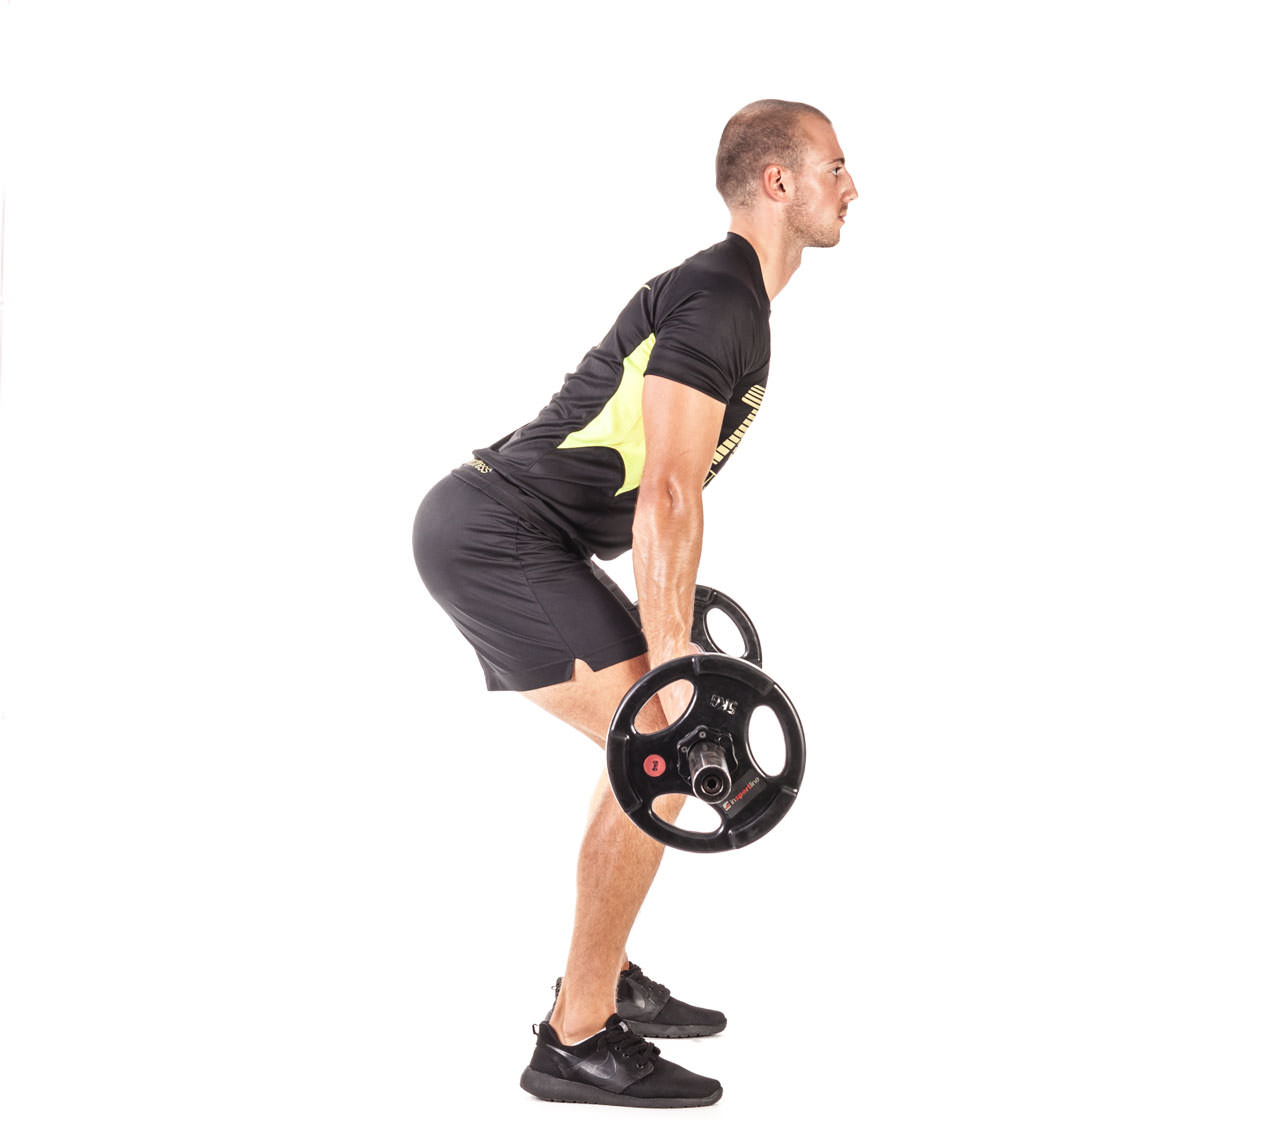 Barbell Bent Over Row (Reverse Grip) frame #6